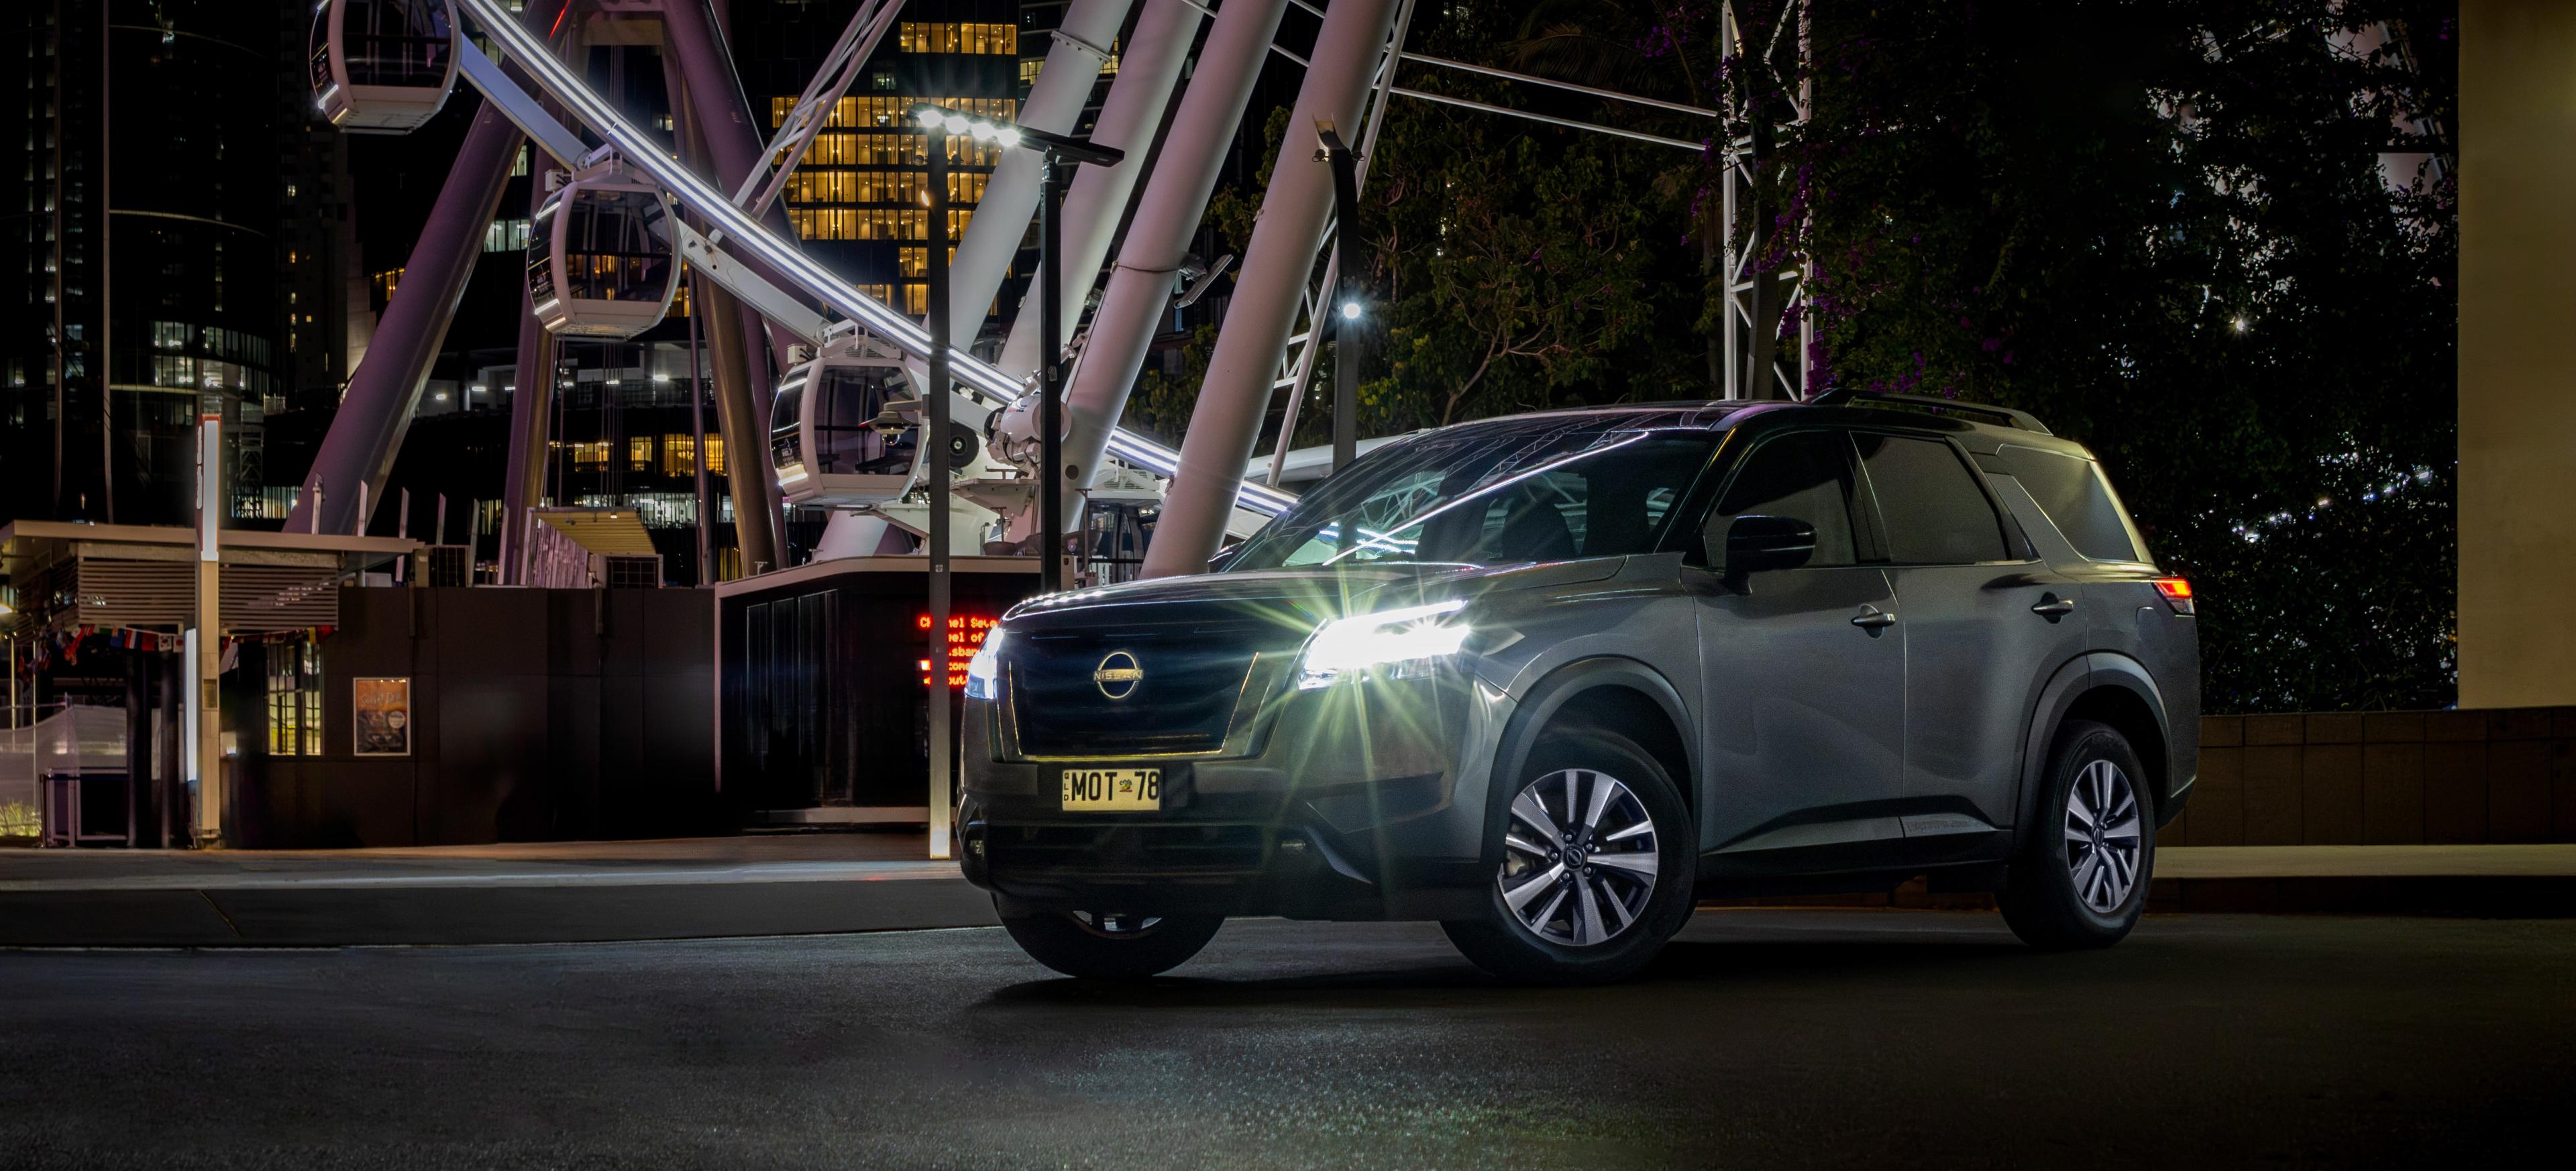 5 Things We Love About the 2023 Nissan Pathfinder banner